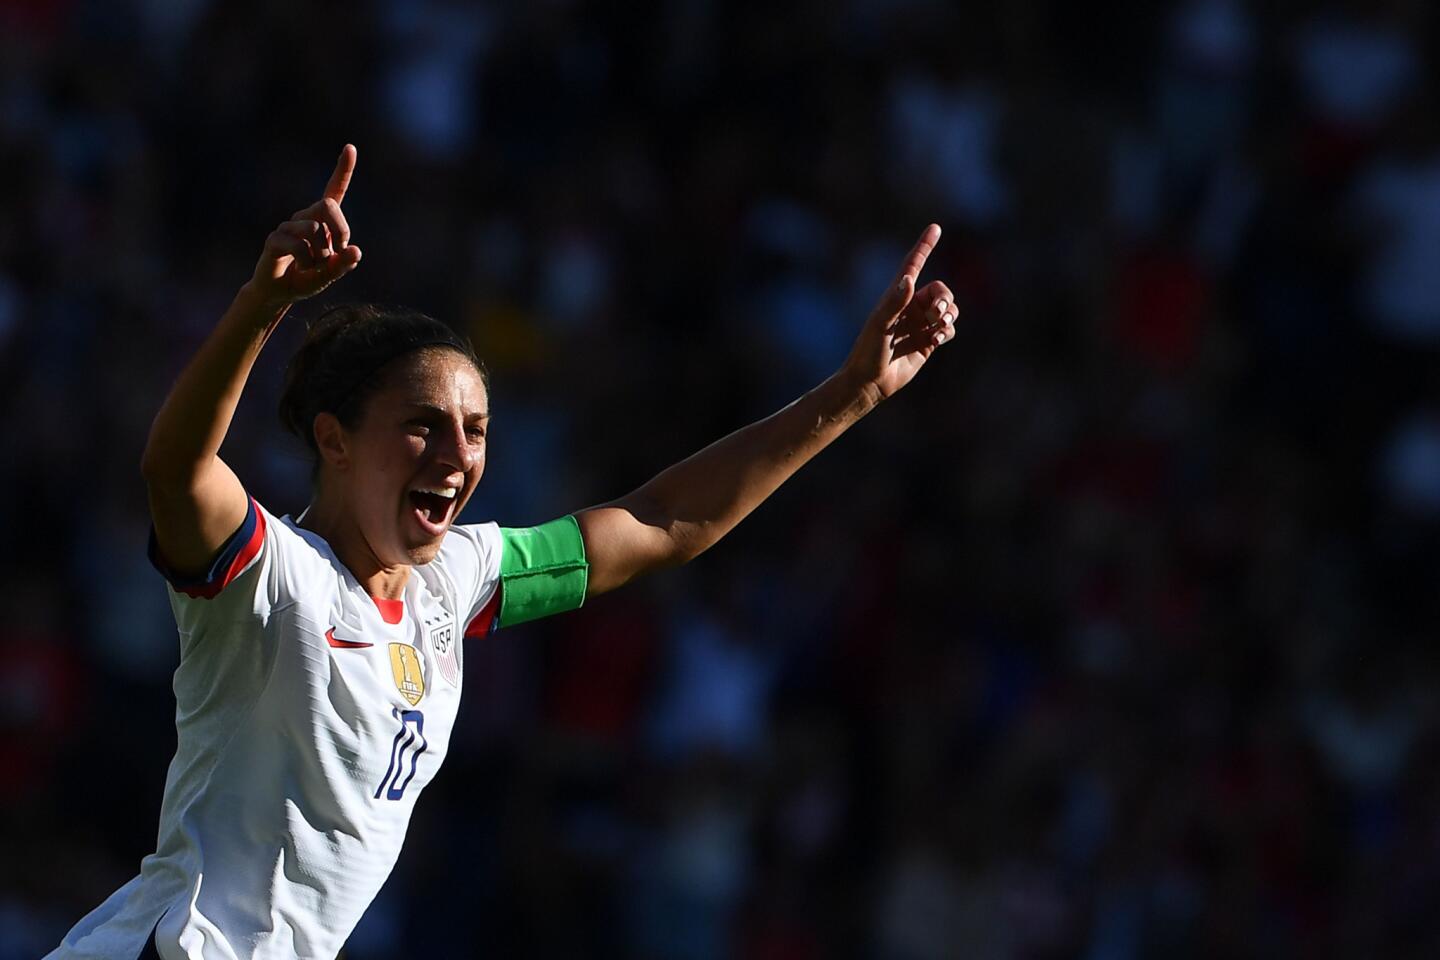 U.S. forward Carli Lloyd celebrates after scoring a goal against Chile in the Women's World Cup on June 16.